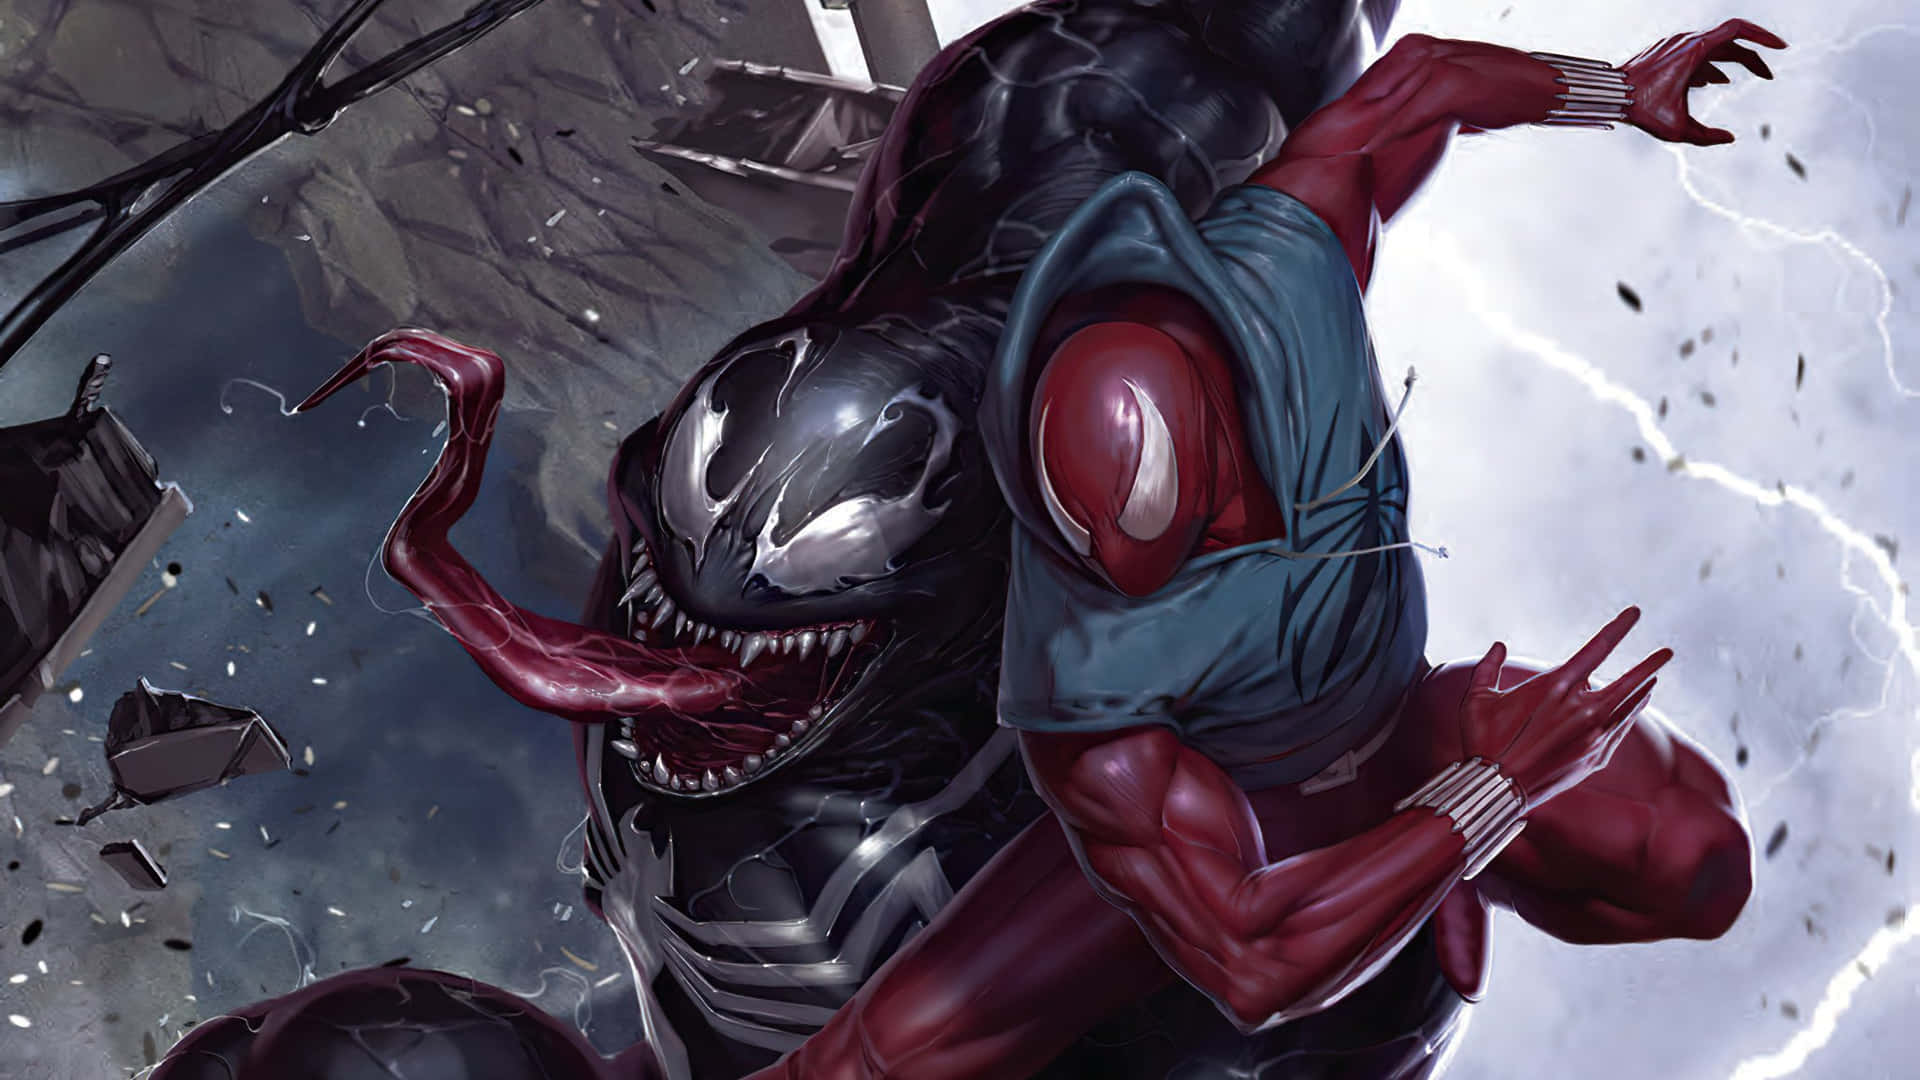 Venom unleashed - the menacing symbiote emerges in the world of Marvel Comics Wallpaper